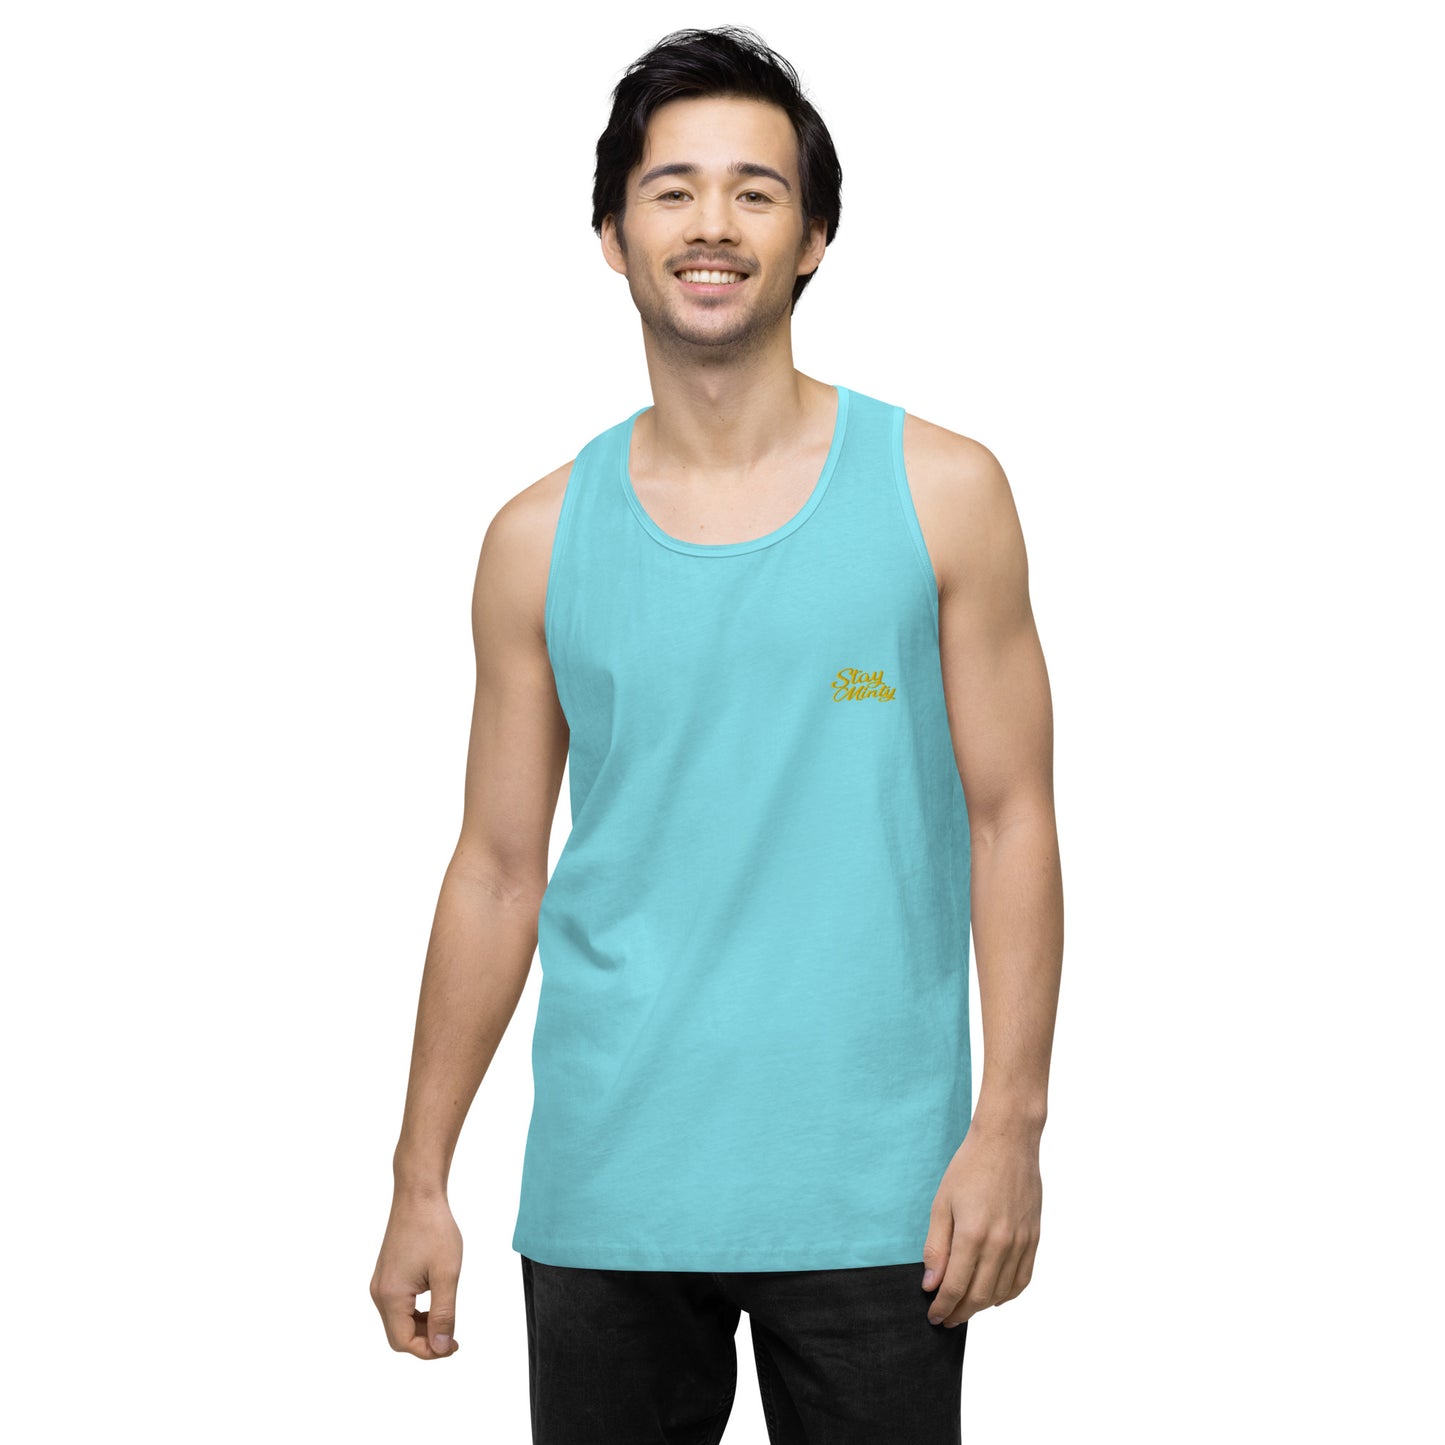 Stay Minty Embroidered Tank-Top